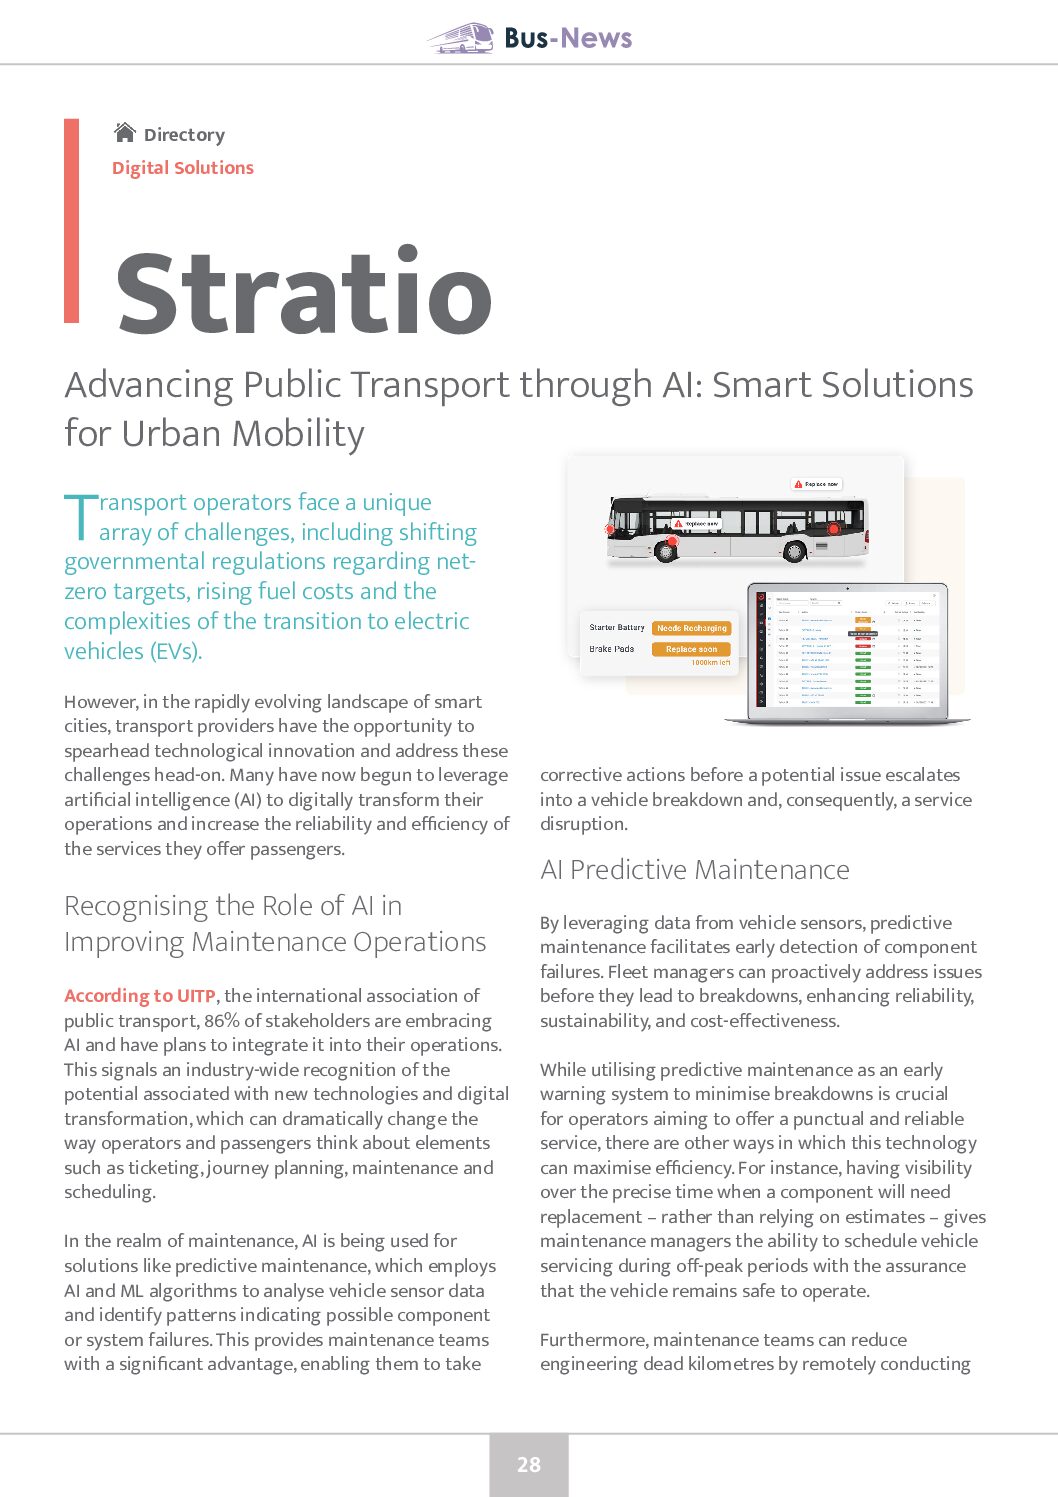 Advancing Public Transport through AI: Smart Solutions for Urban Mobility